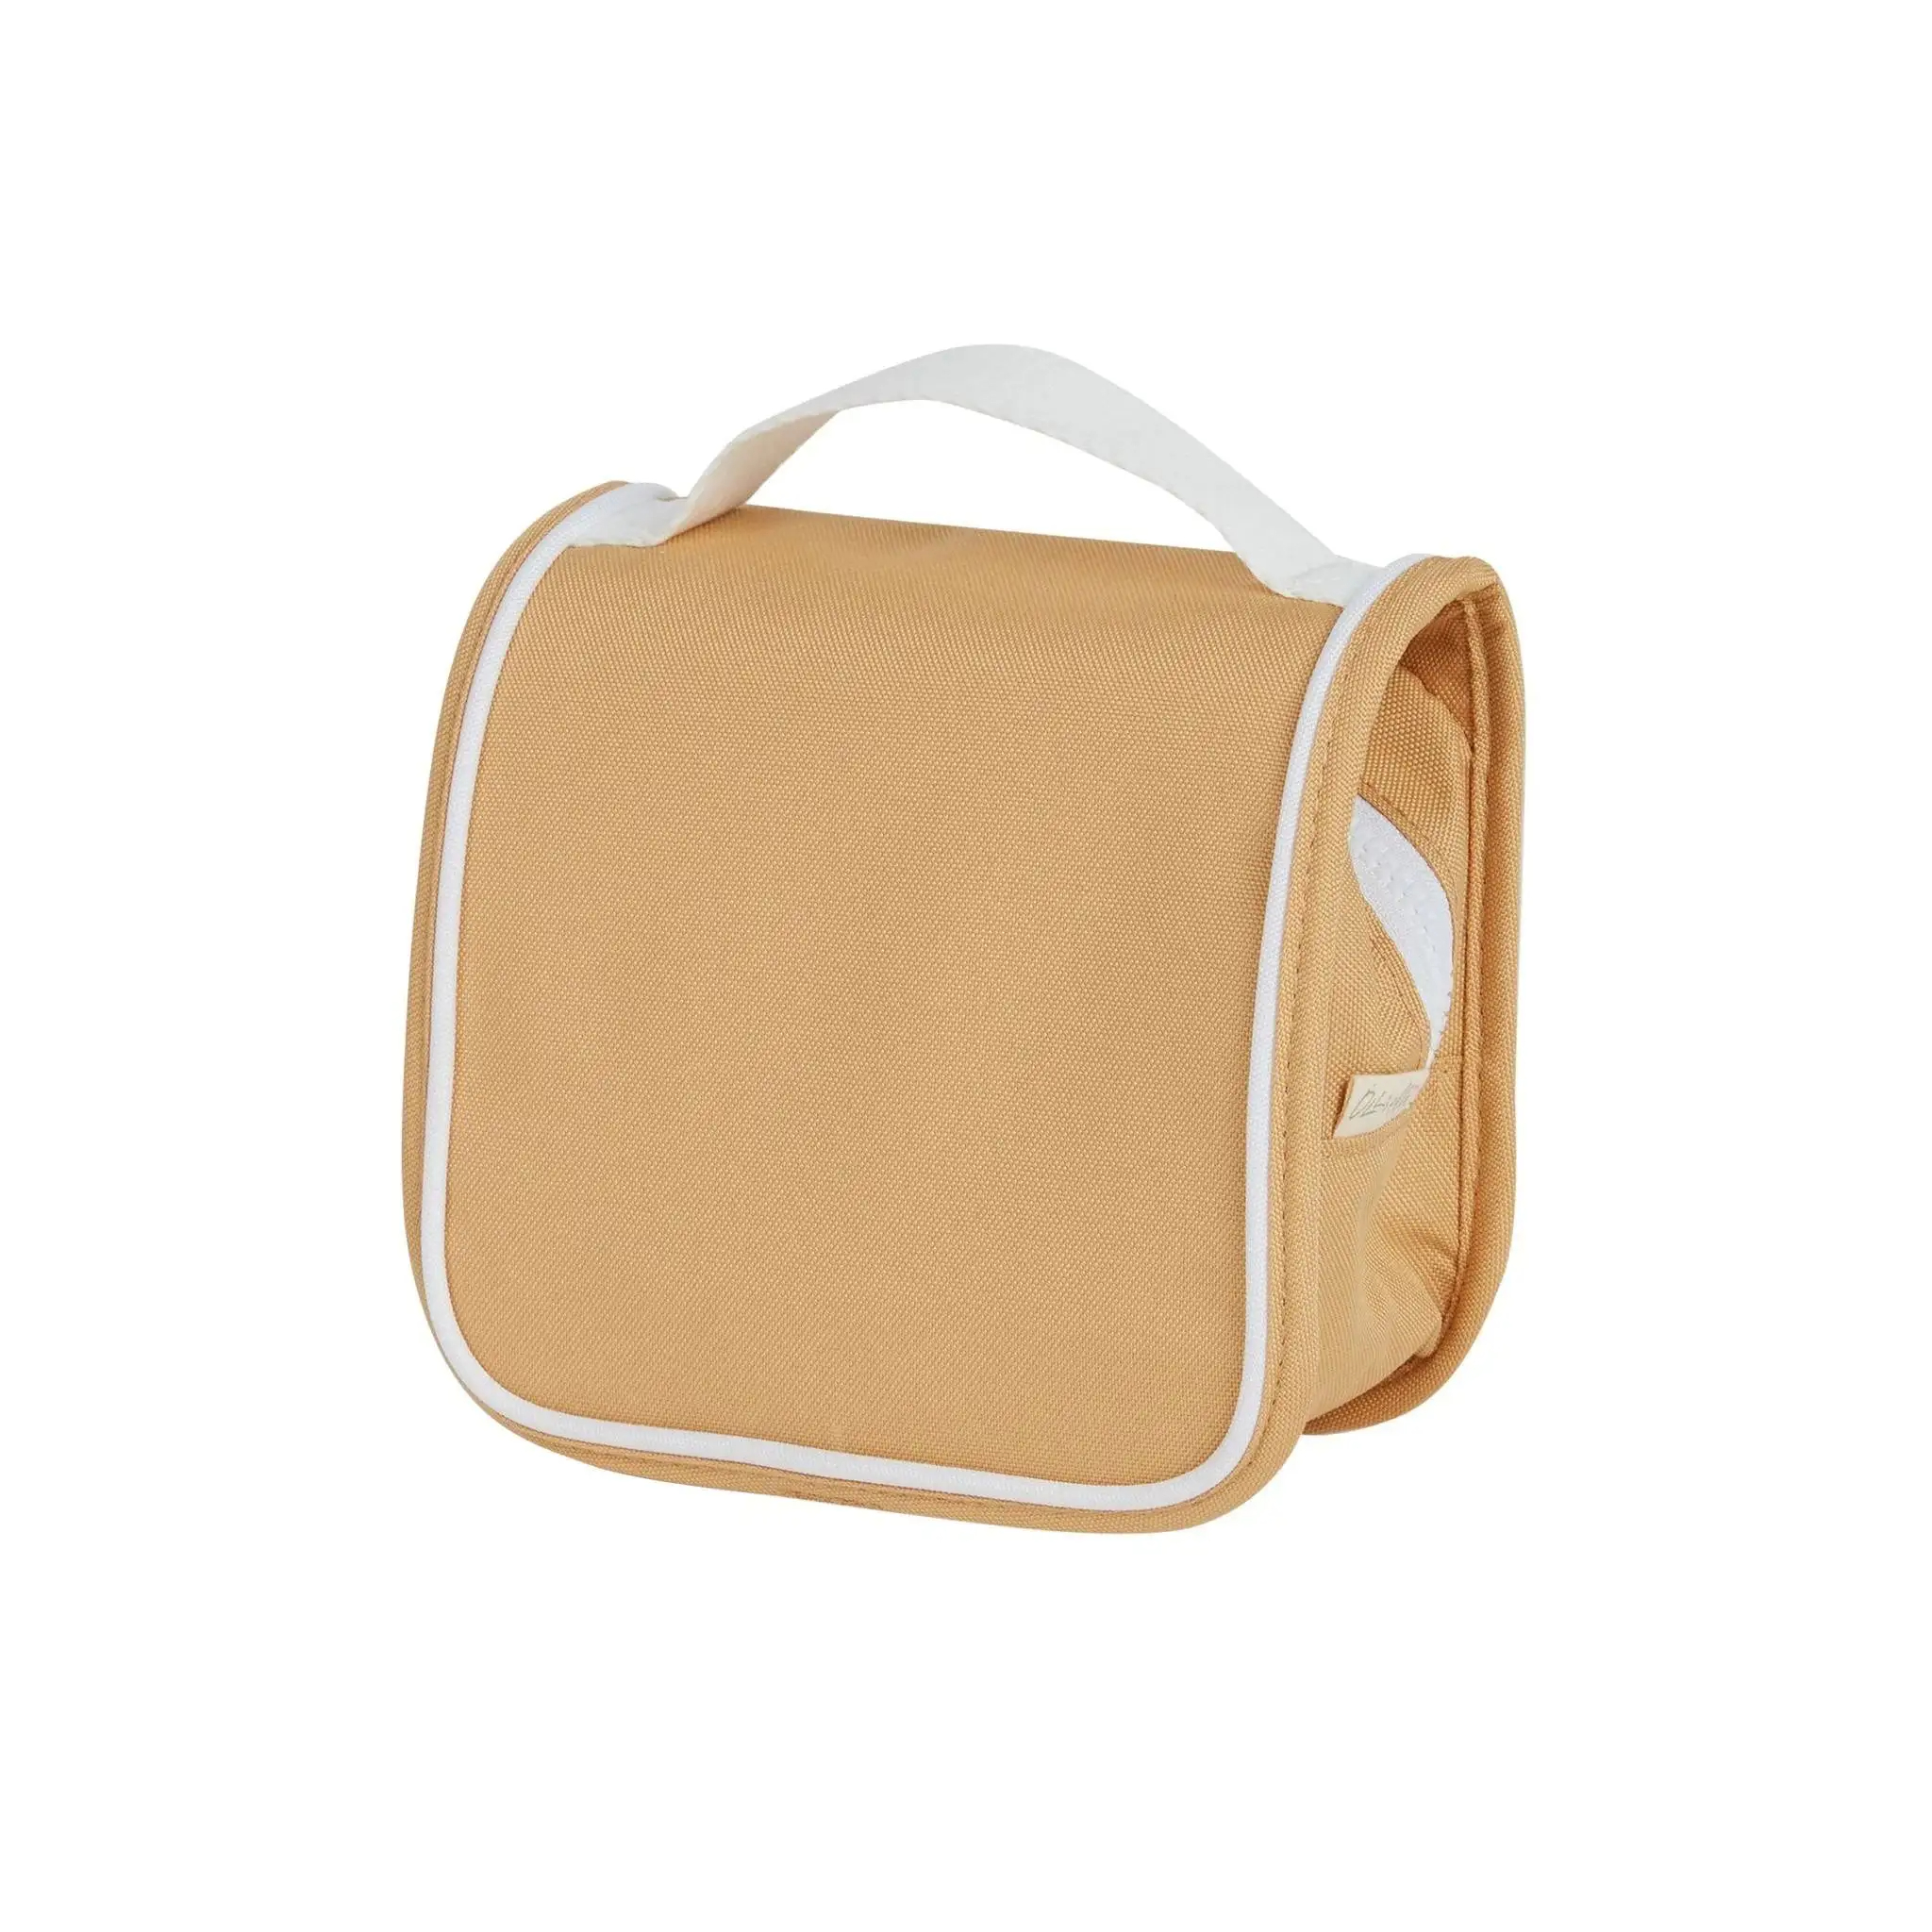 WellPromotion Bulk Toiletry Bags